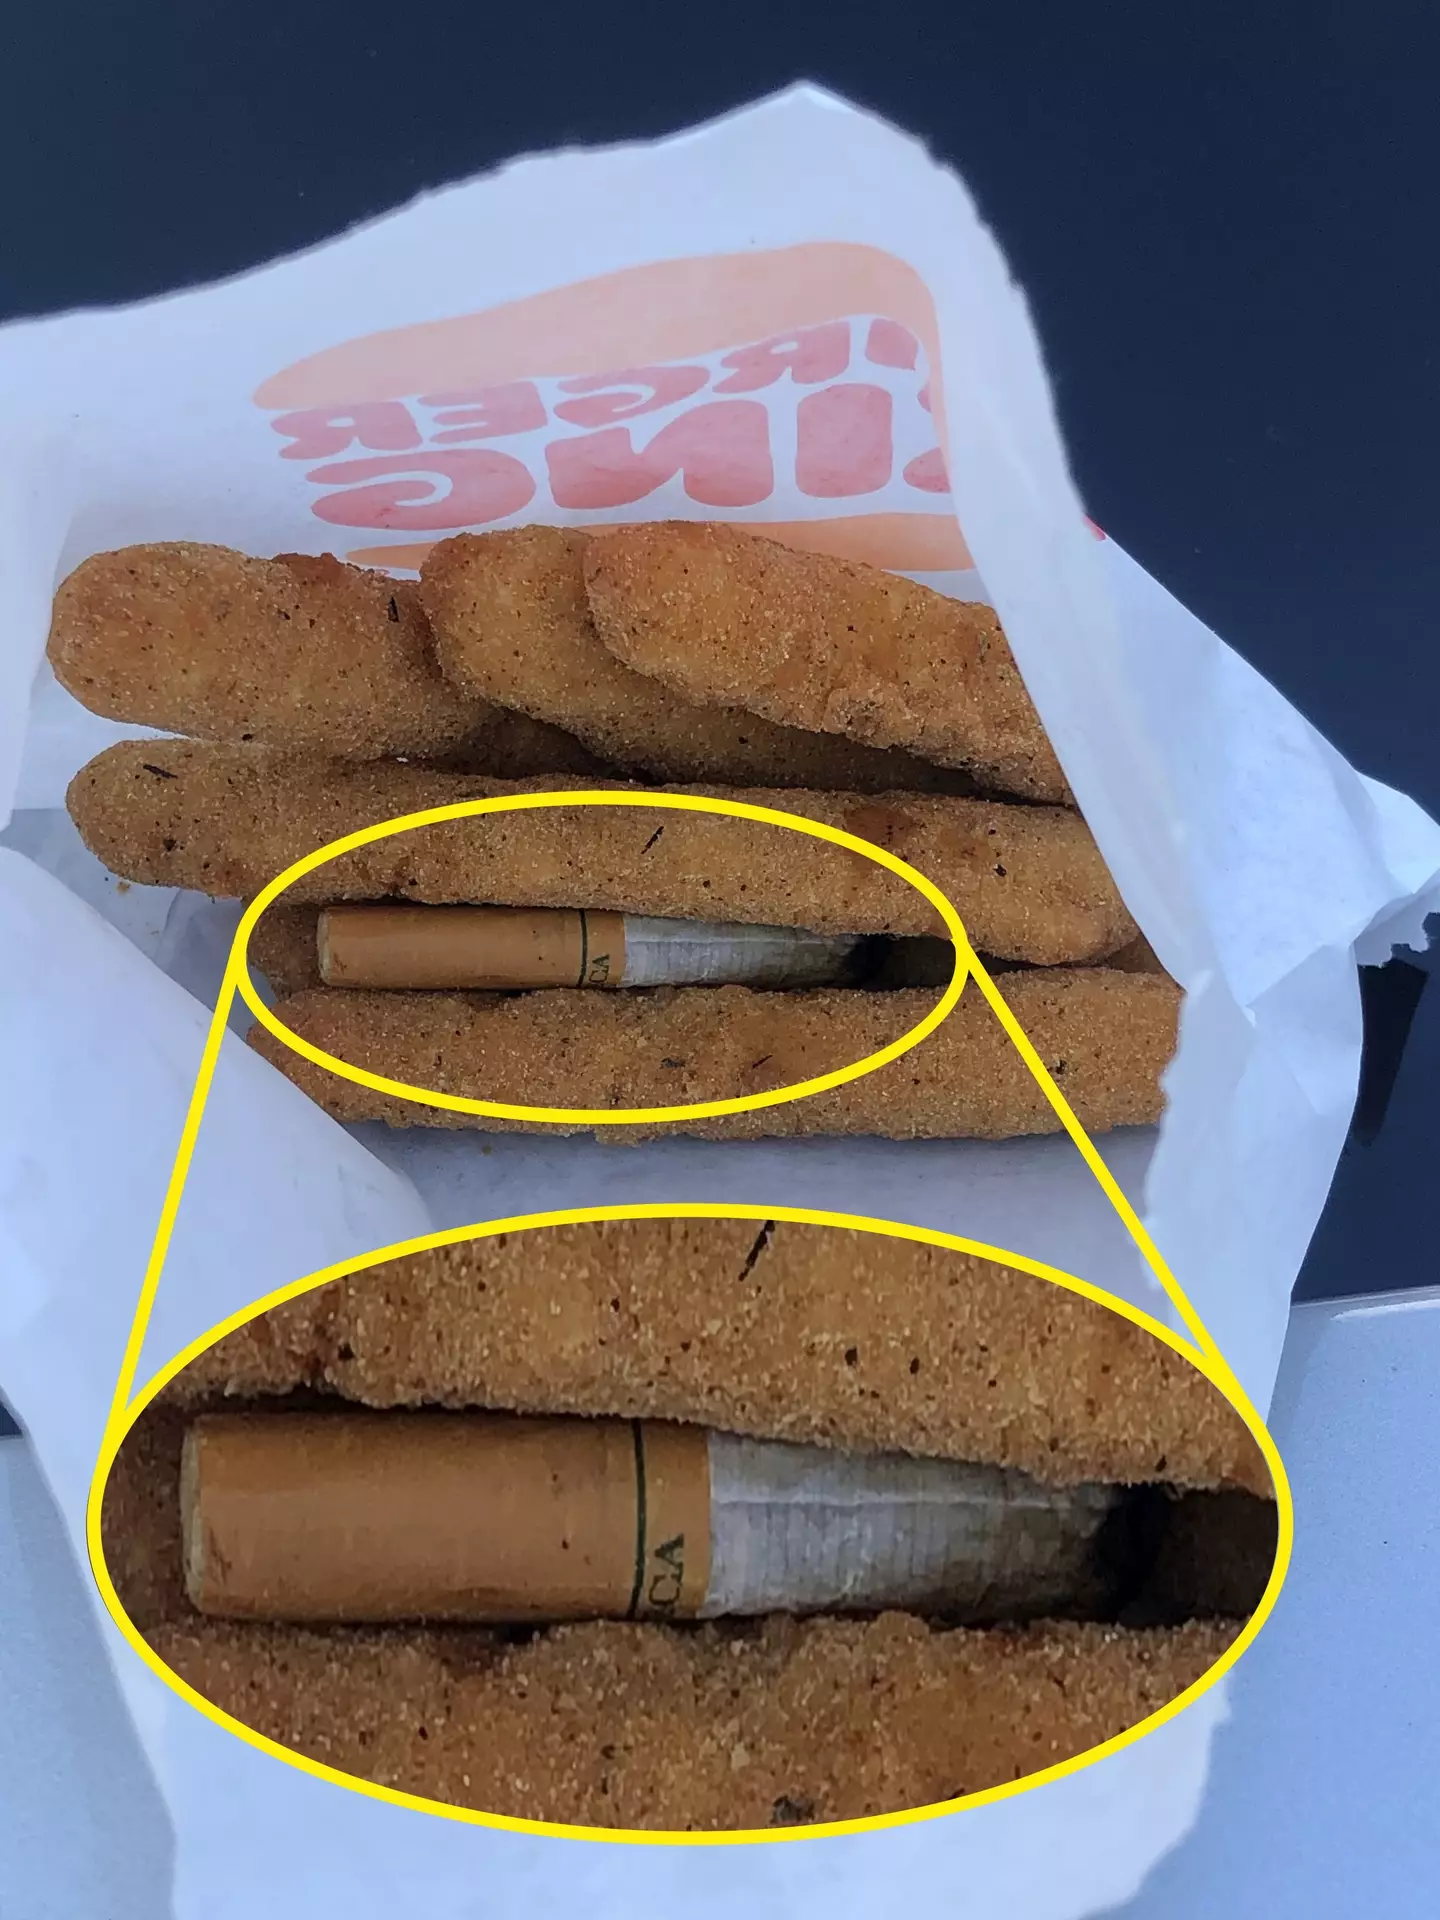 The cigarette was discovered amongst a pack of chicken fries.